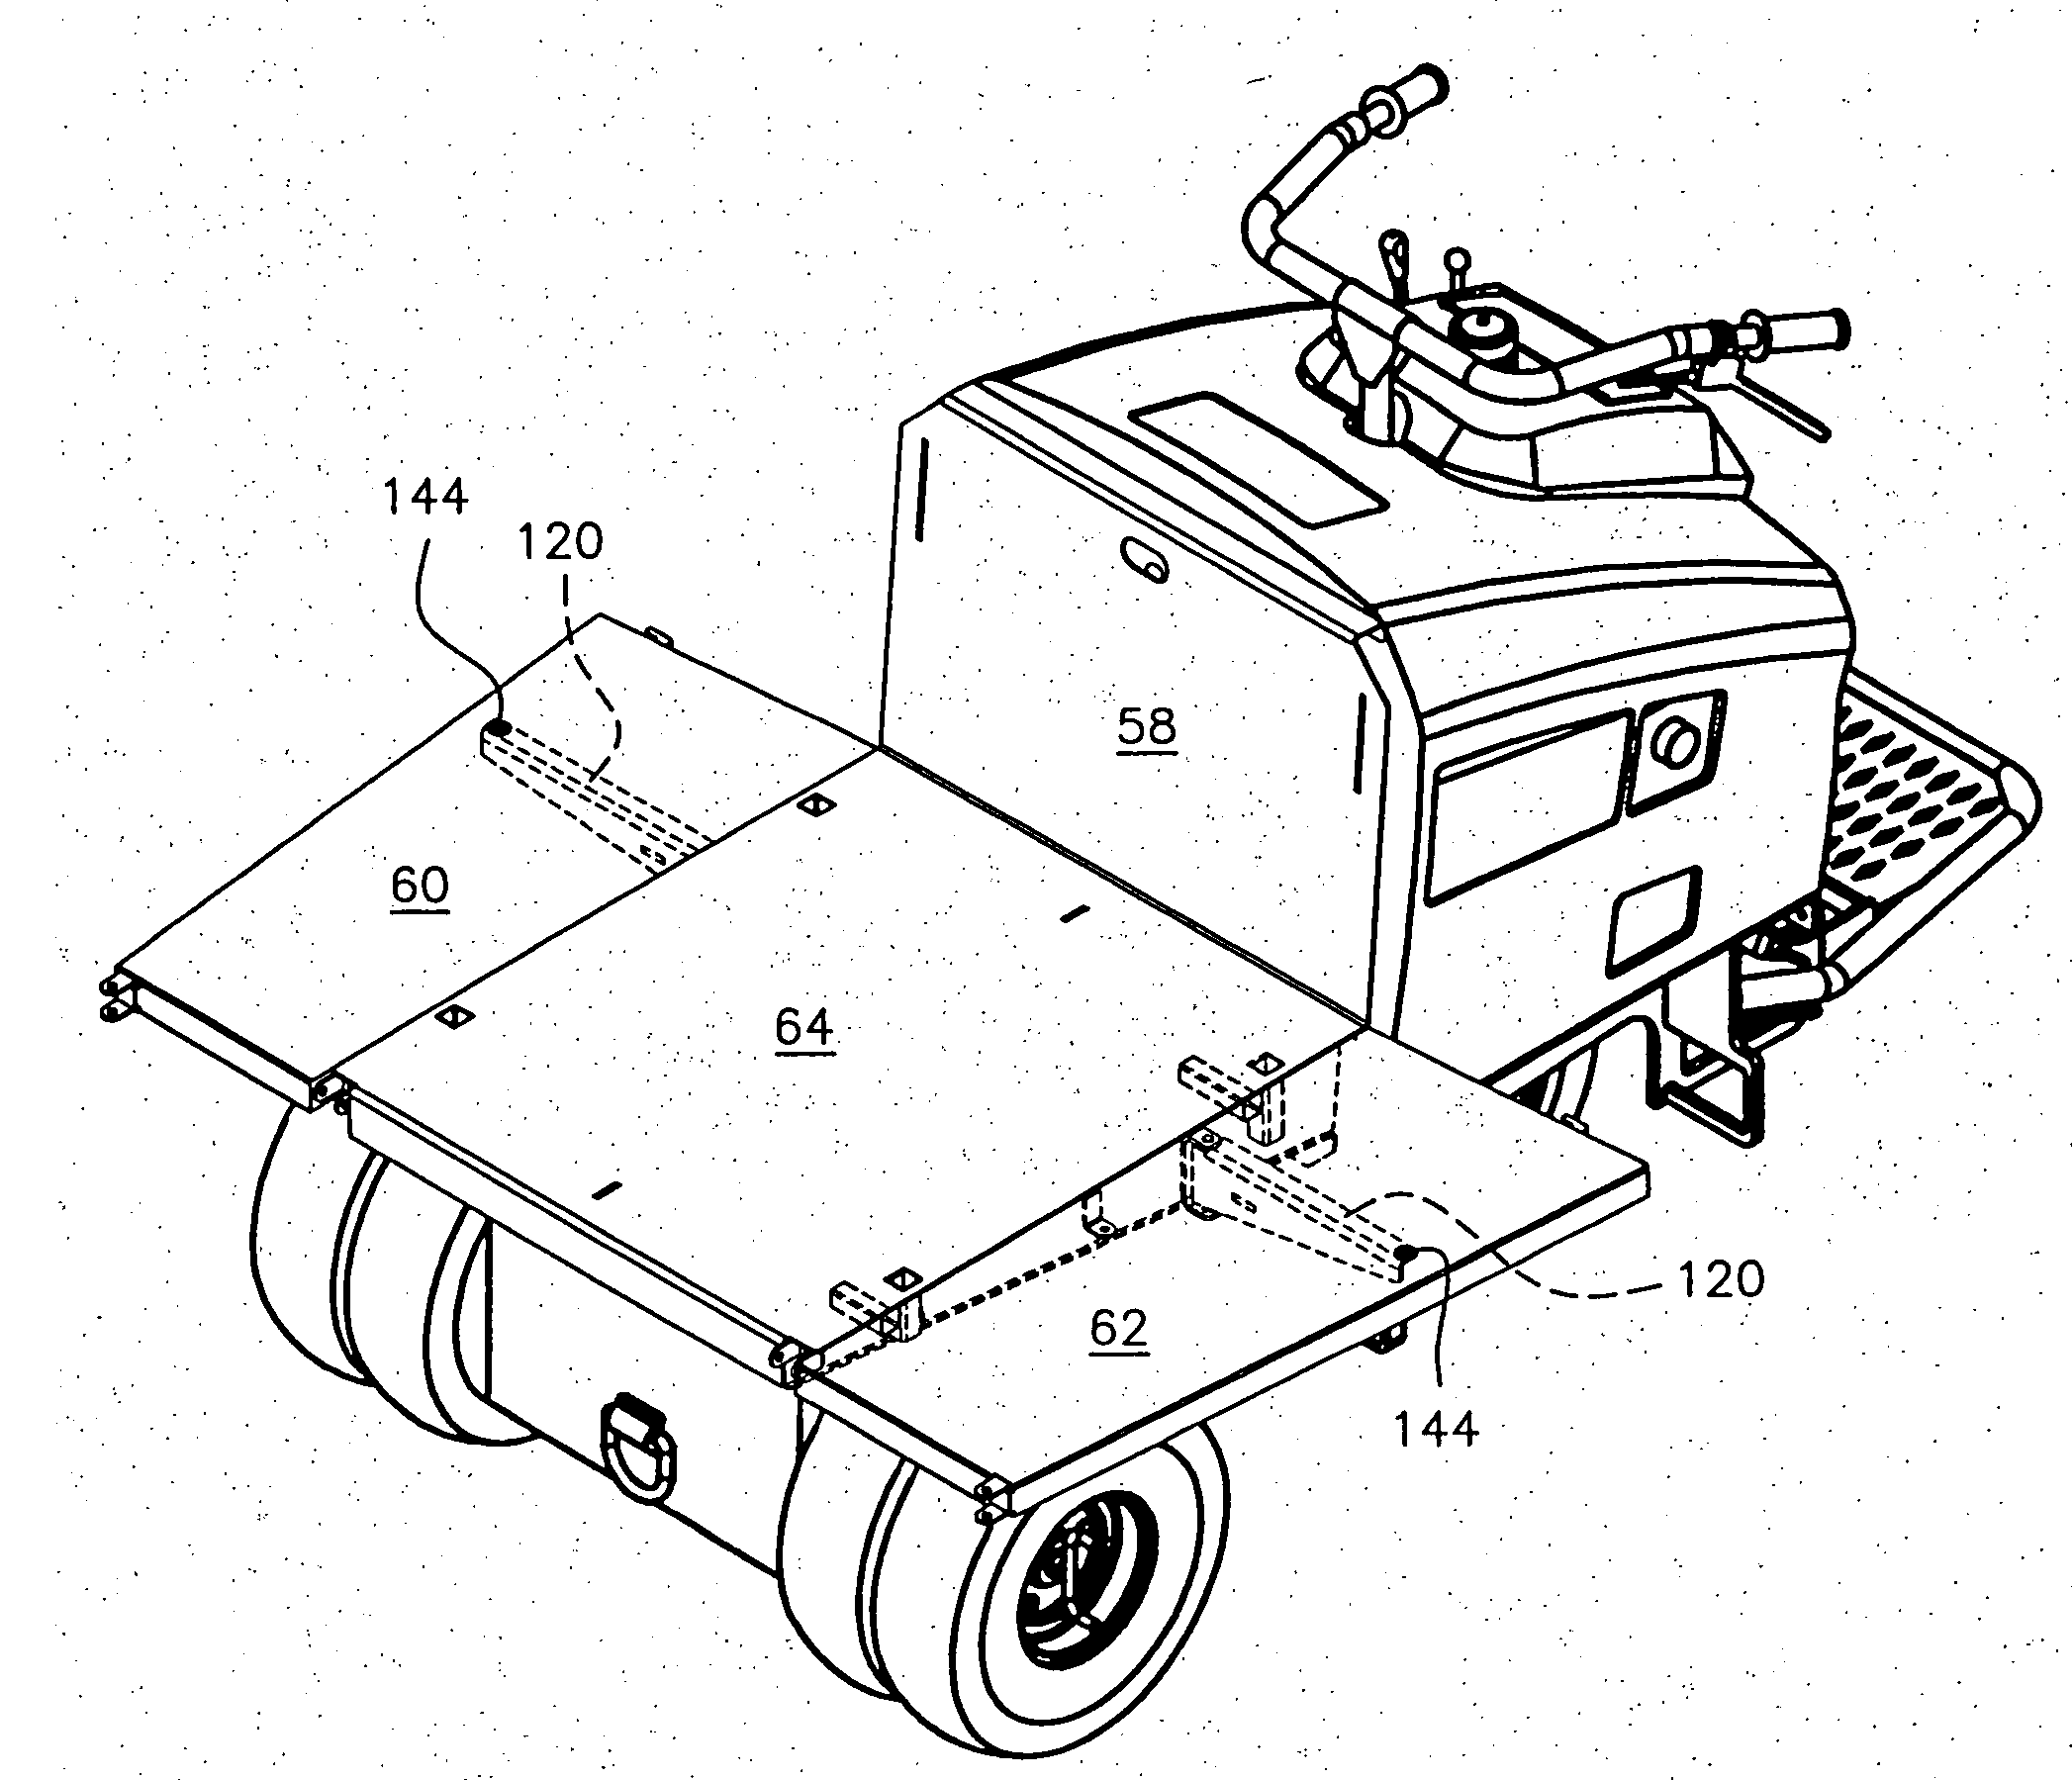 Mortar buggy with stake bed assembly